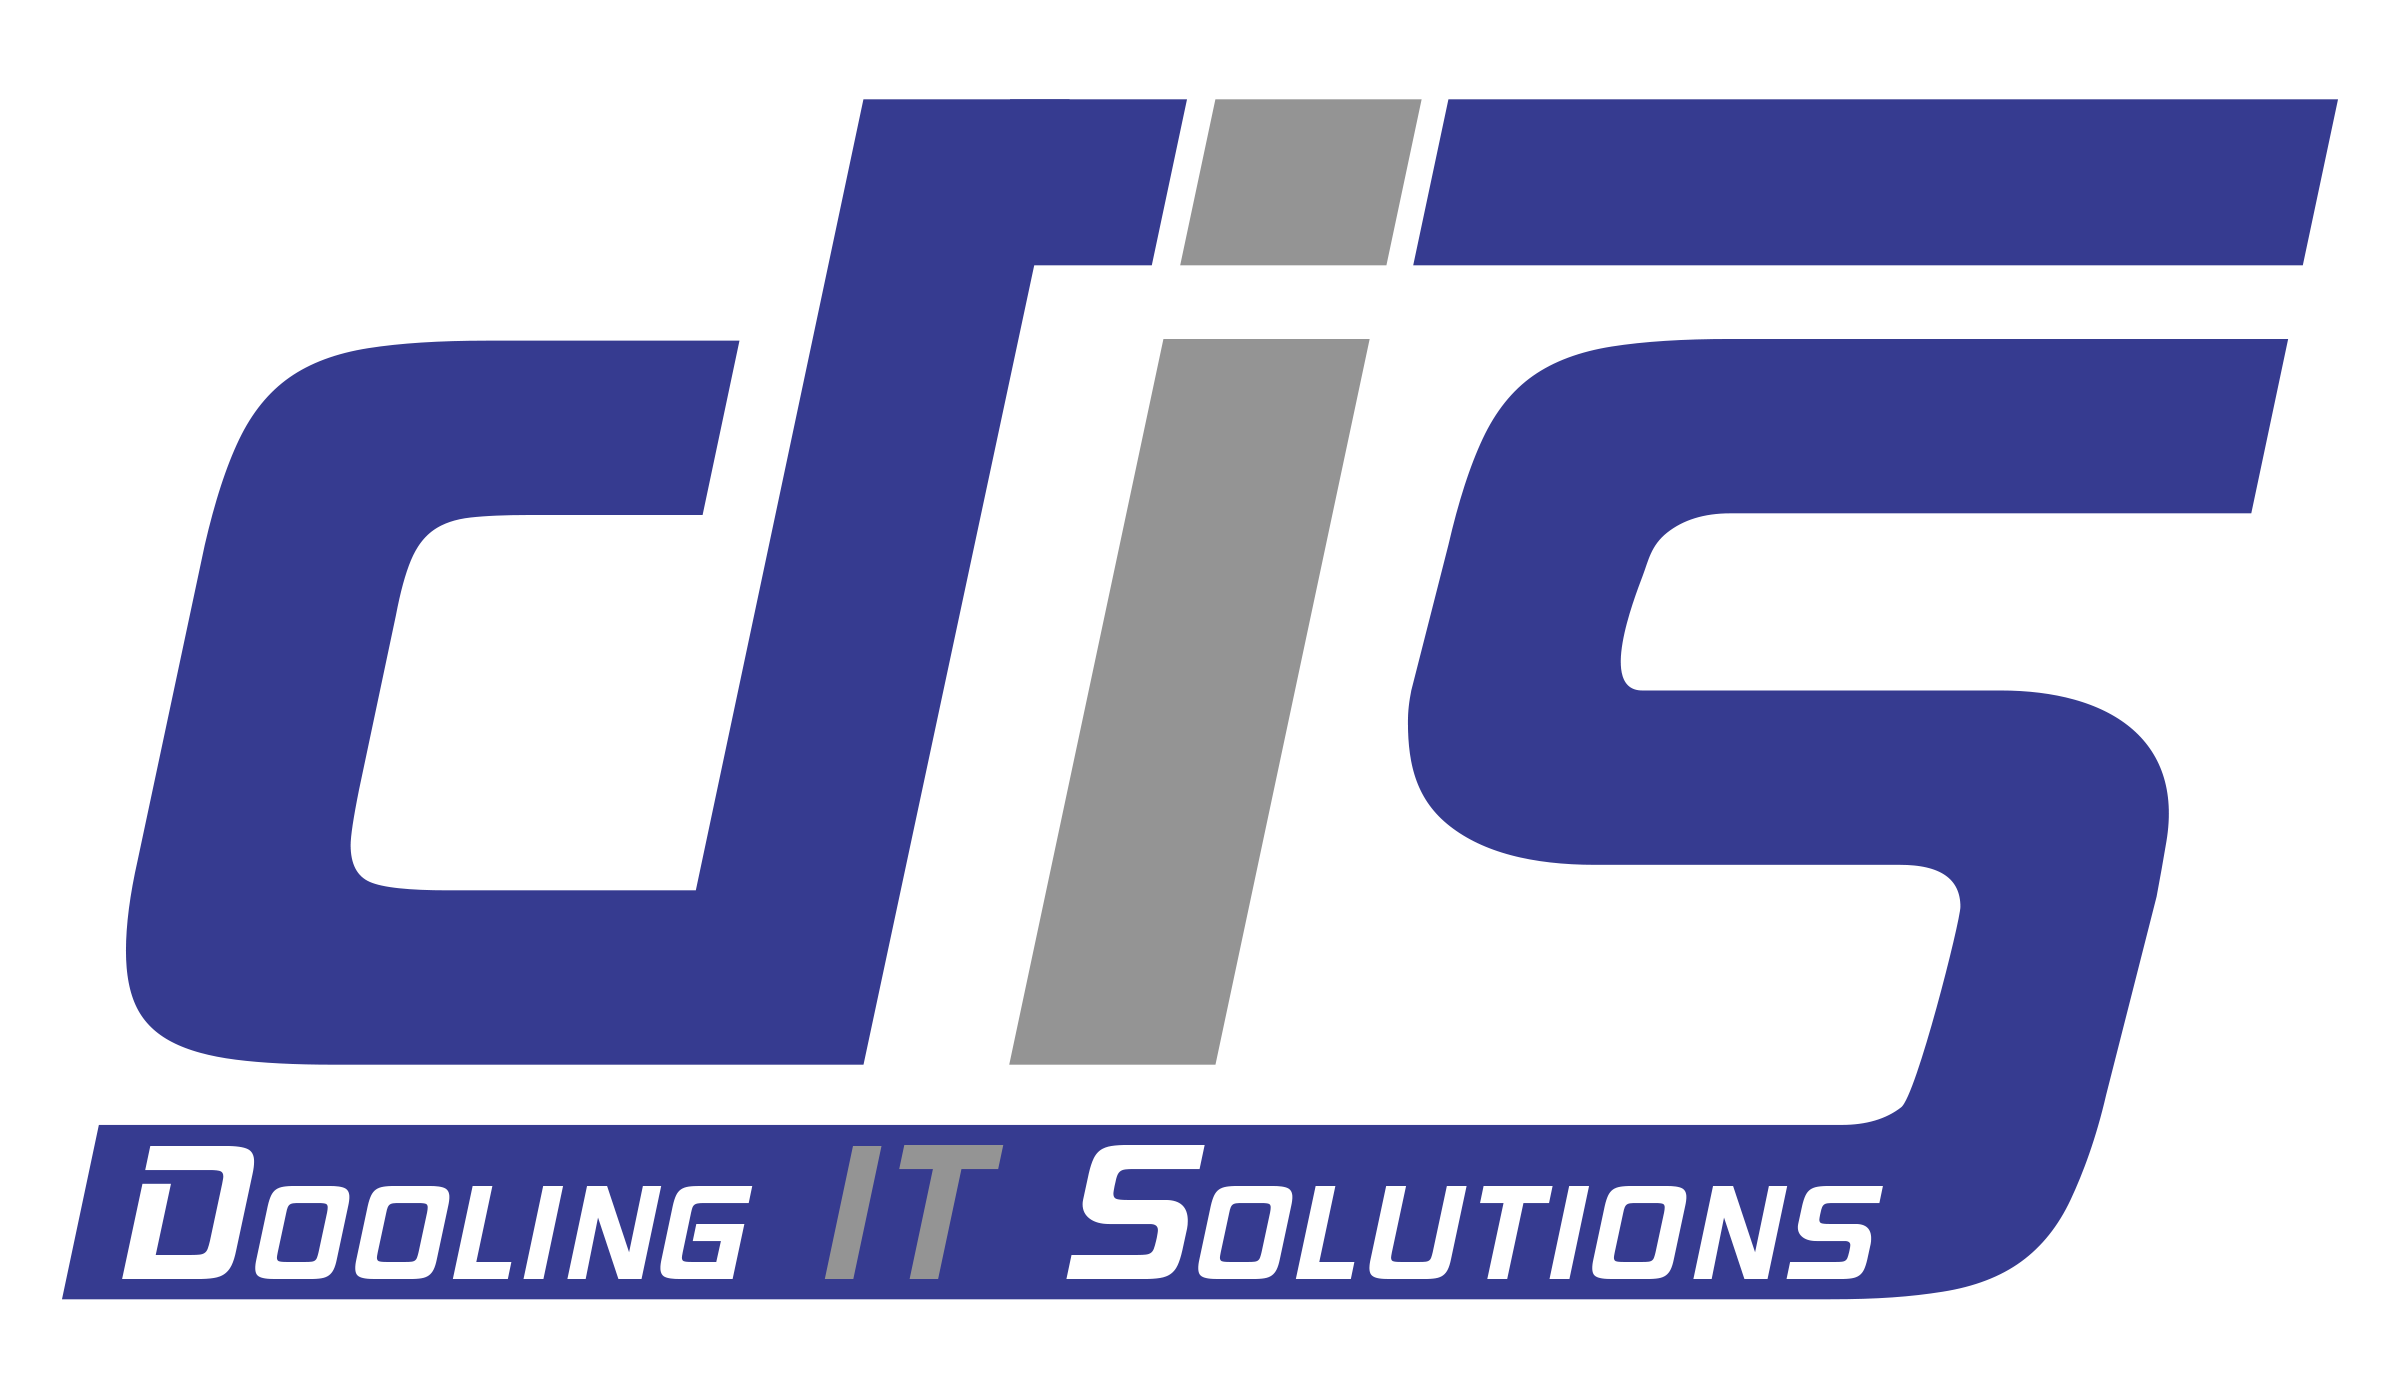 Dooling IT solutions T/A Computers Direct logo